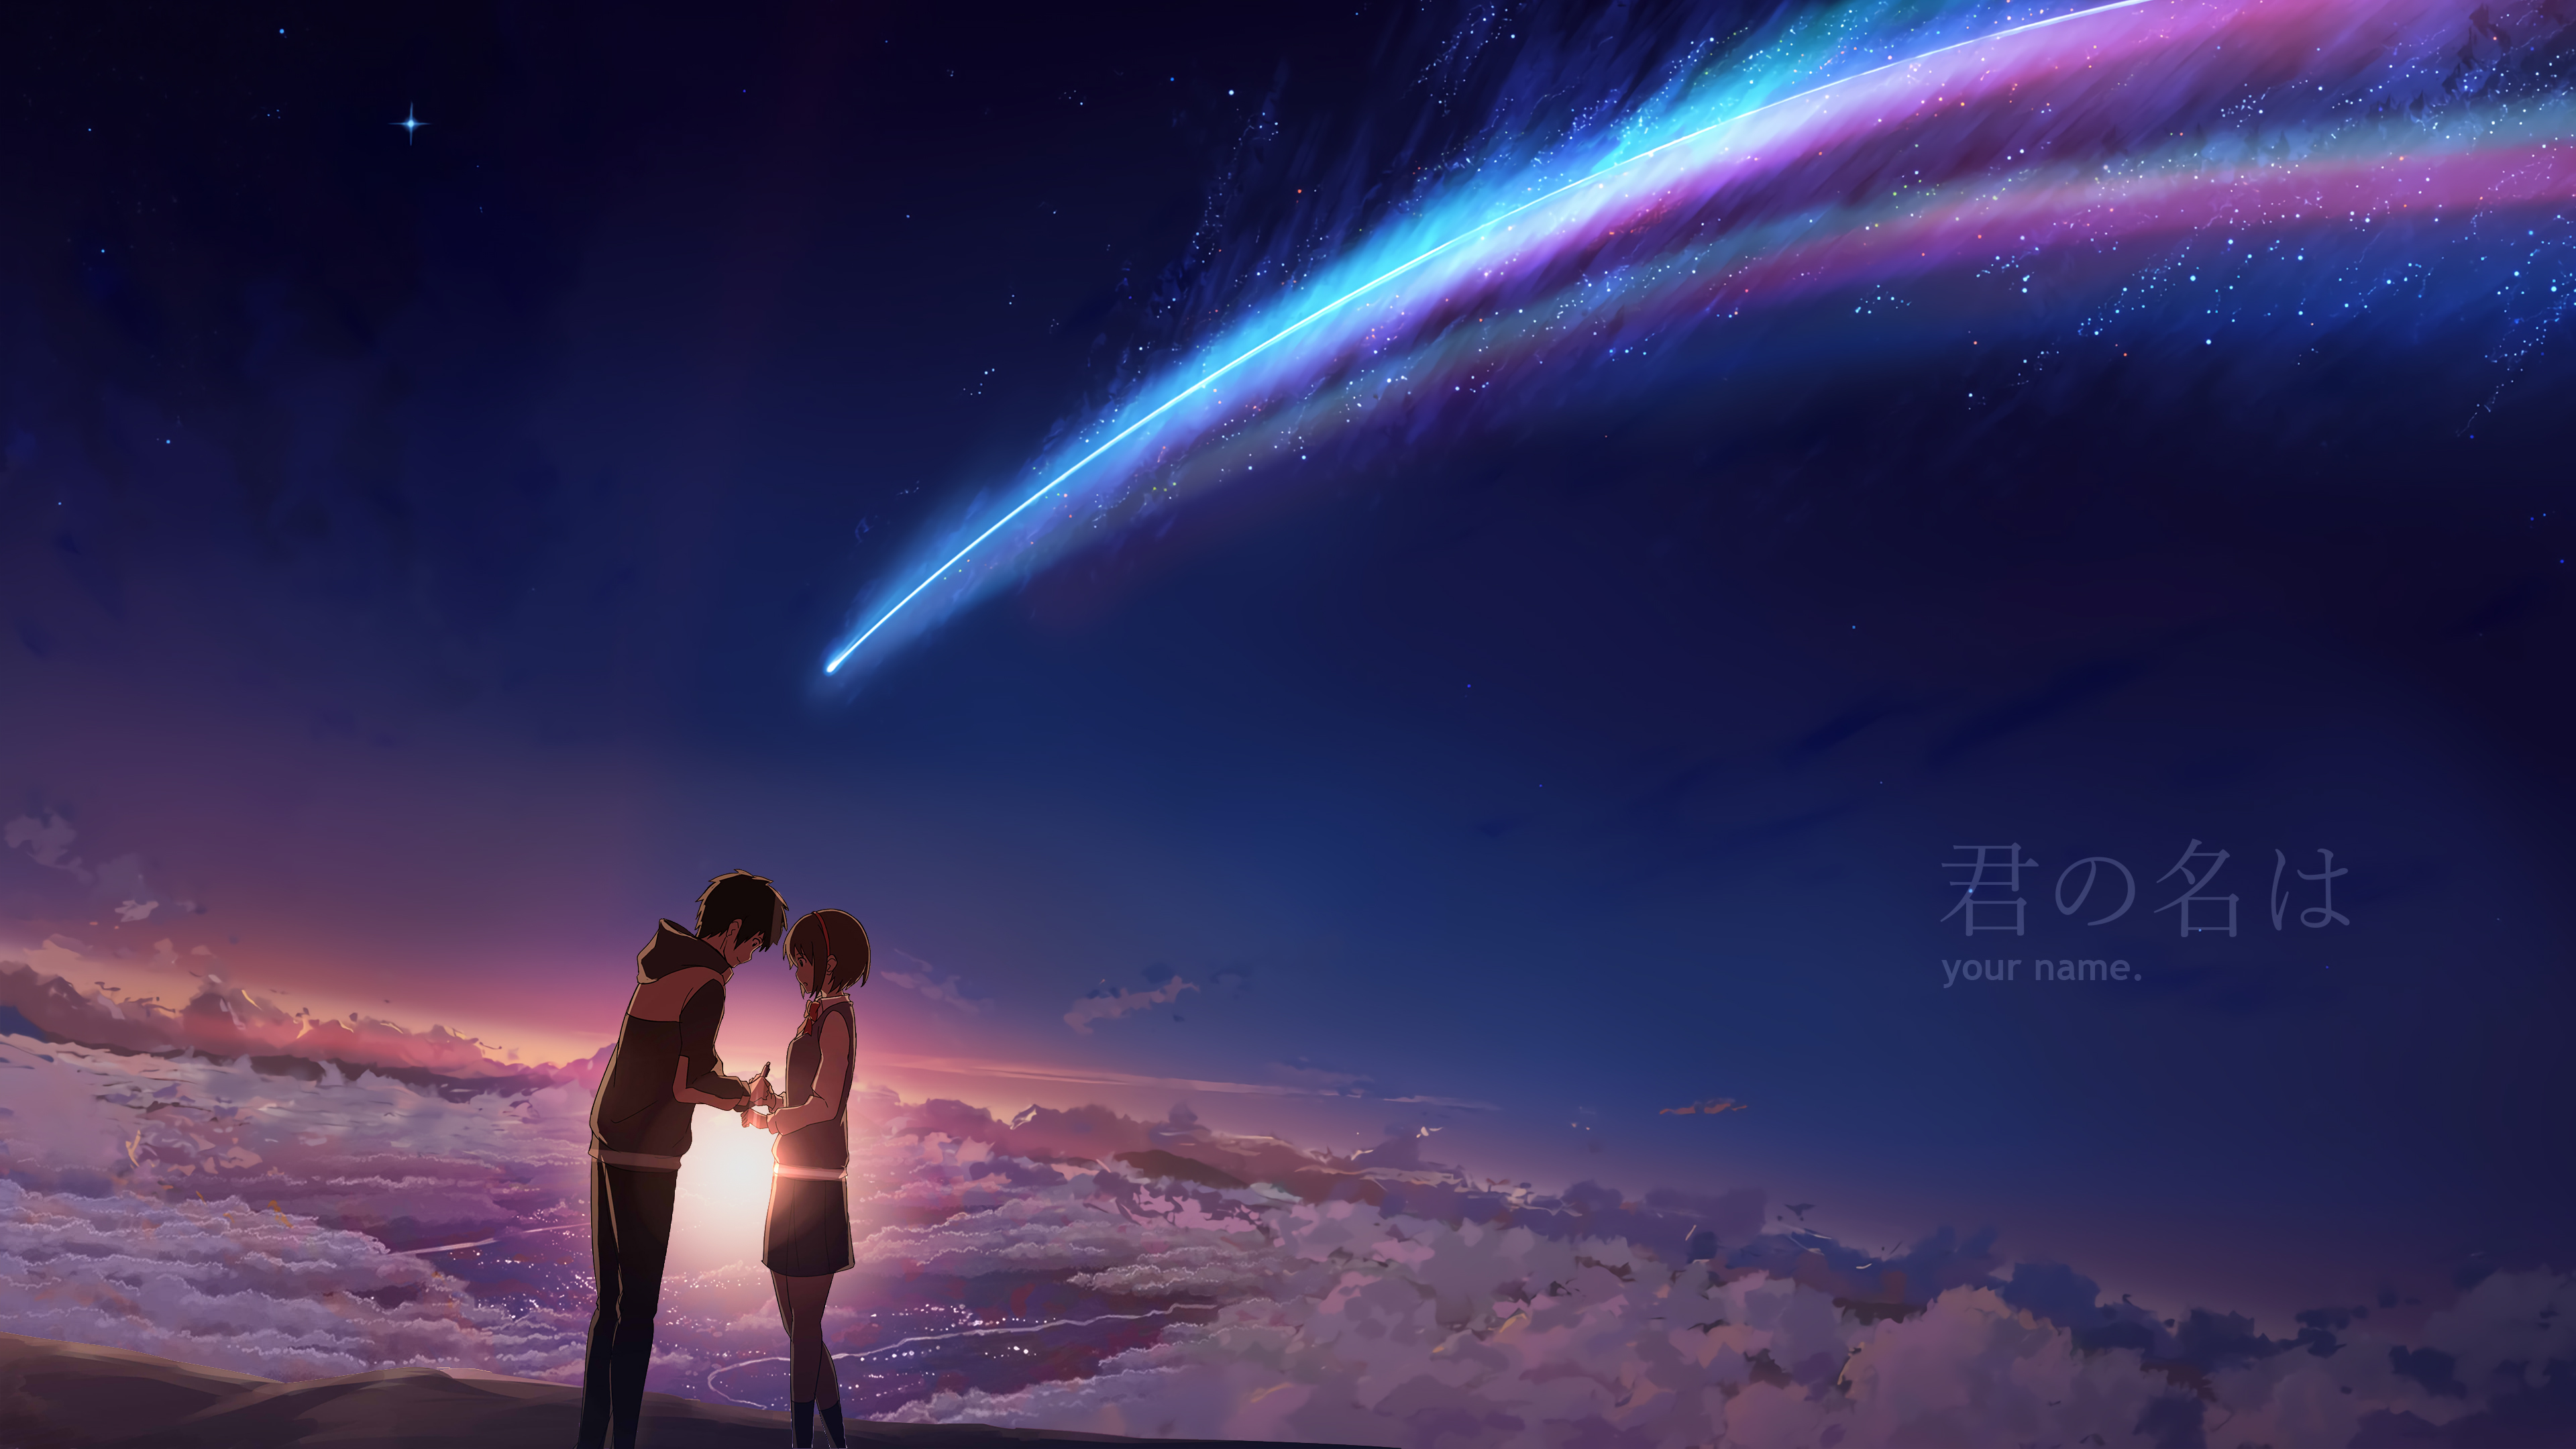 Your Name. 4k Ultra HD Wallpaper by AssassinWarrior